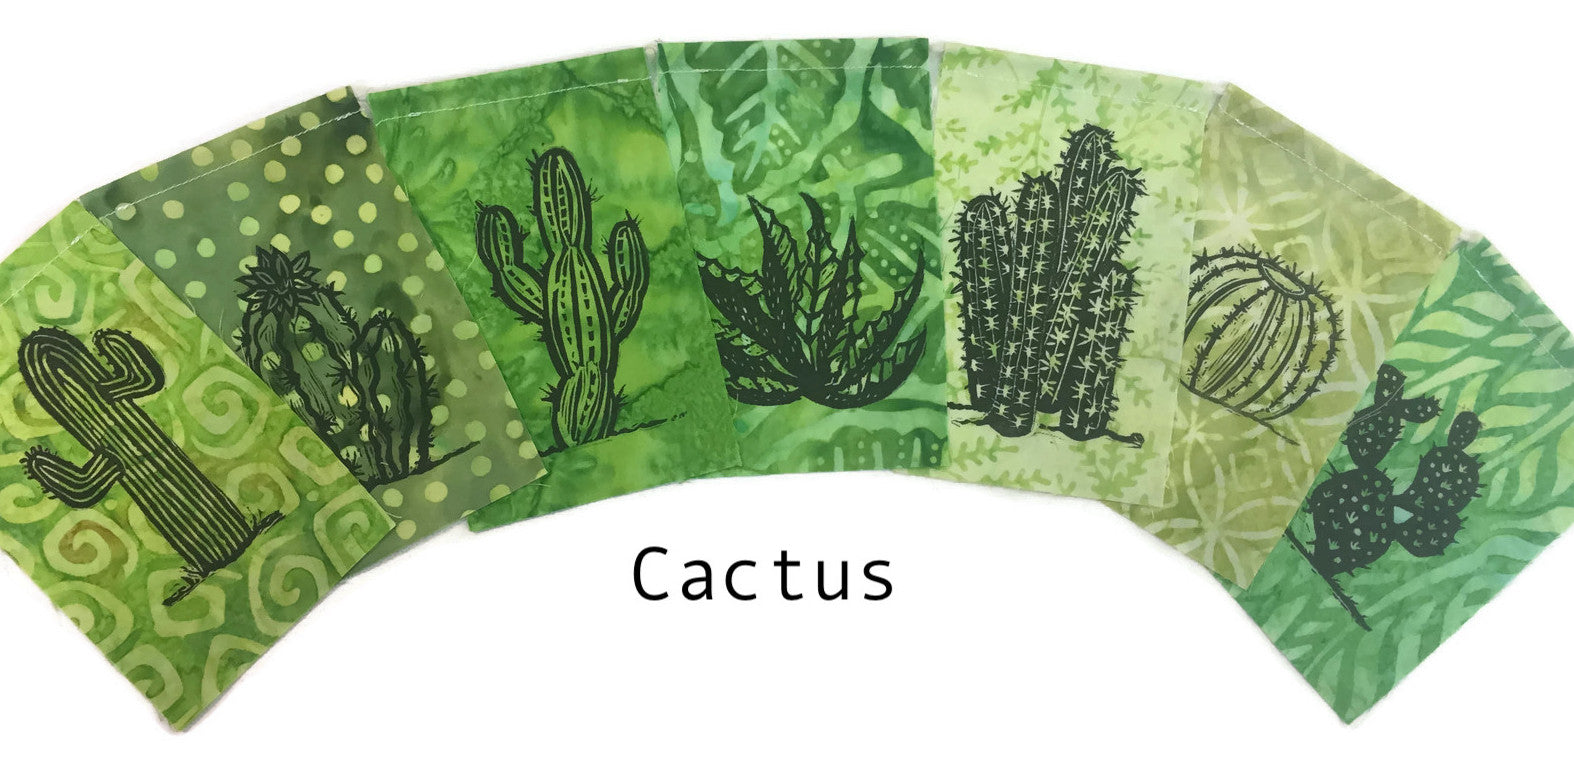 Small Flag Set with images and words to celebrate Cacti